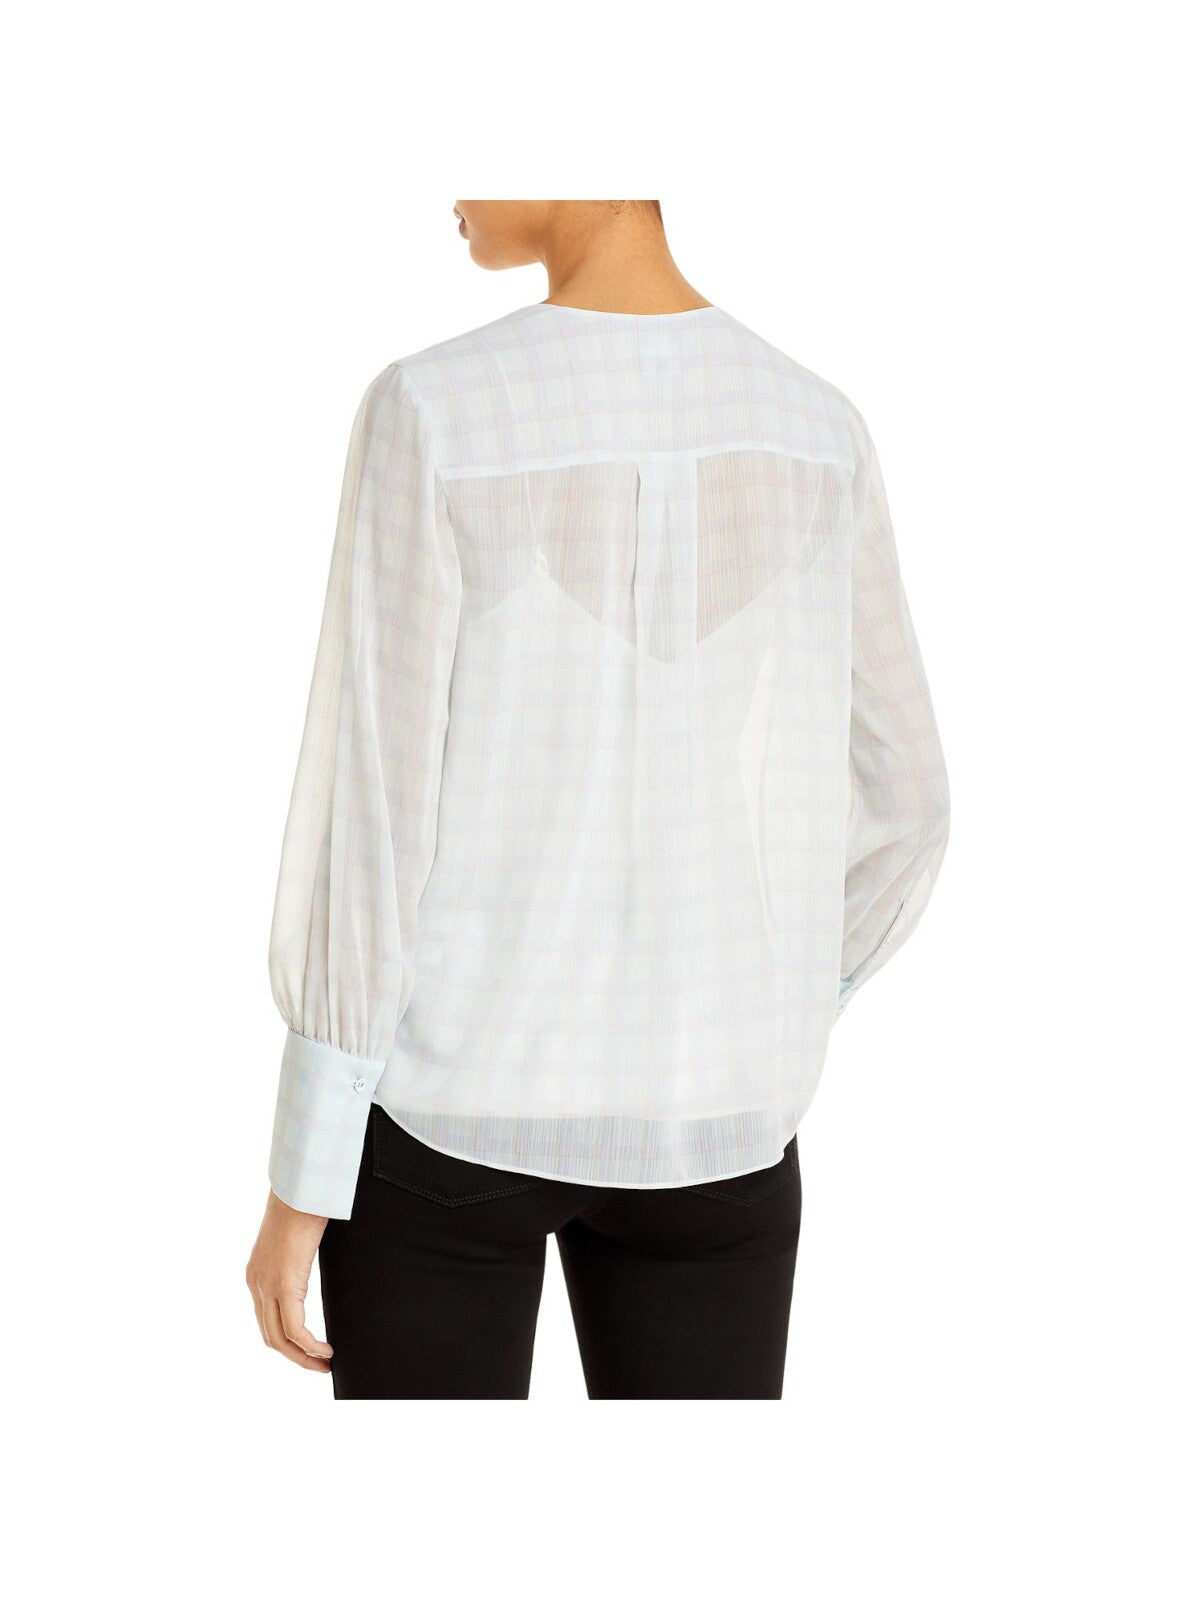 EMPORIO ARMANI Womens Ivory Sheer Crossover Front Plaid Cuffed Sleeve Top 38